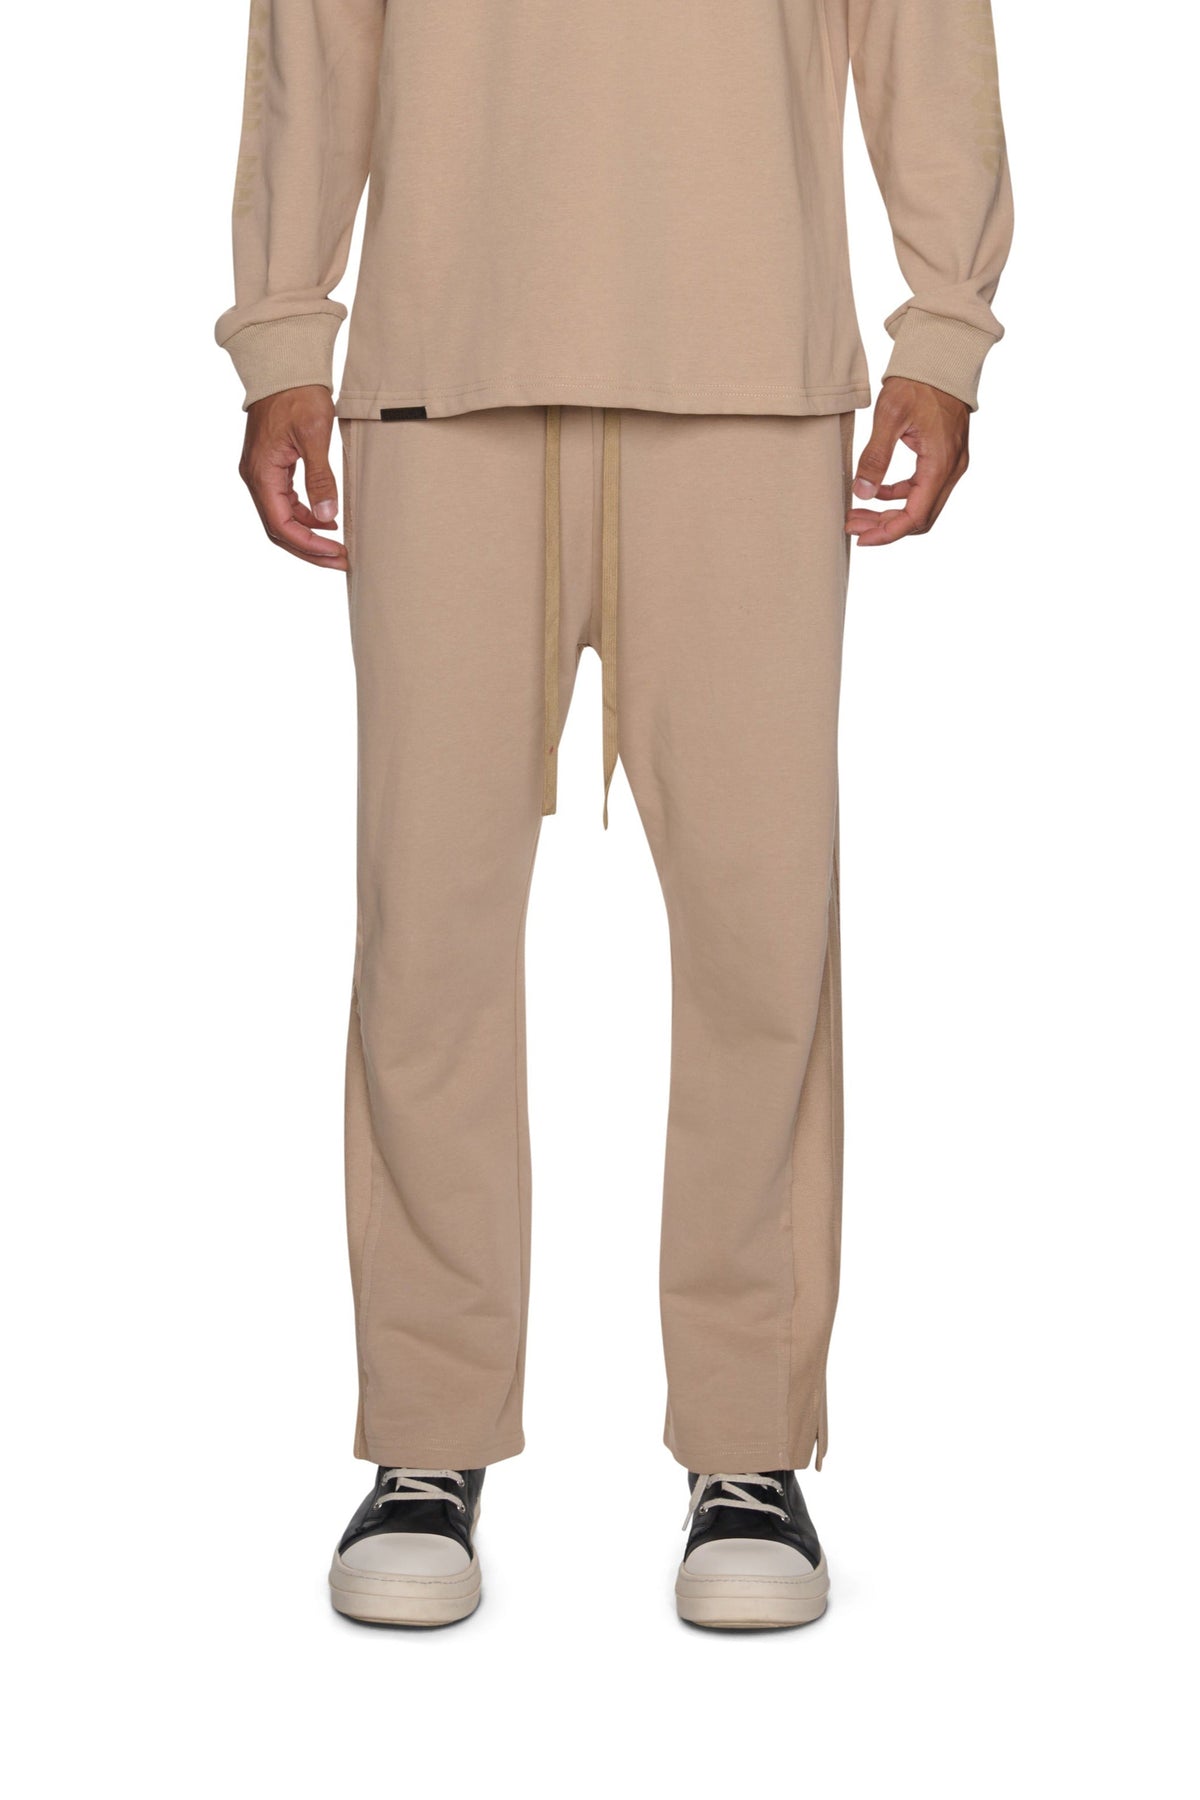 NEW YORKER TERRY JOGGER BIEGE